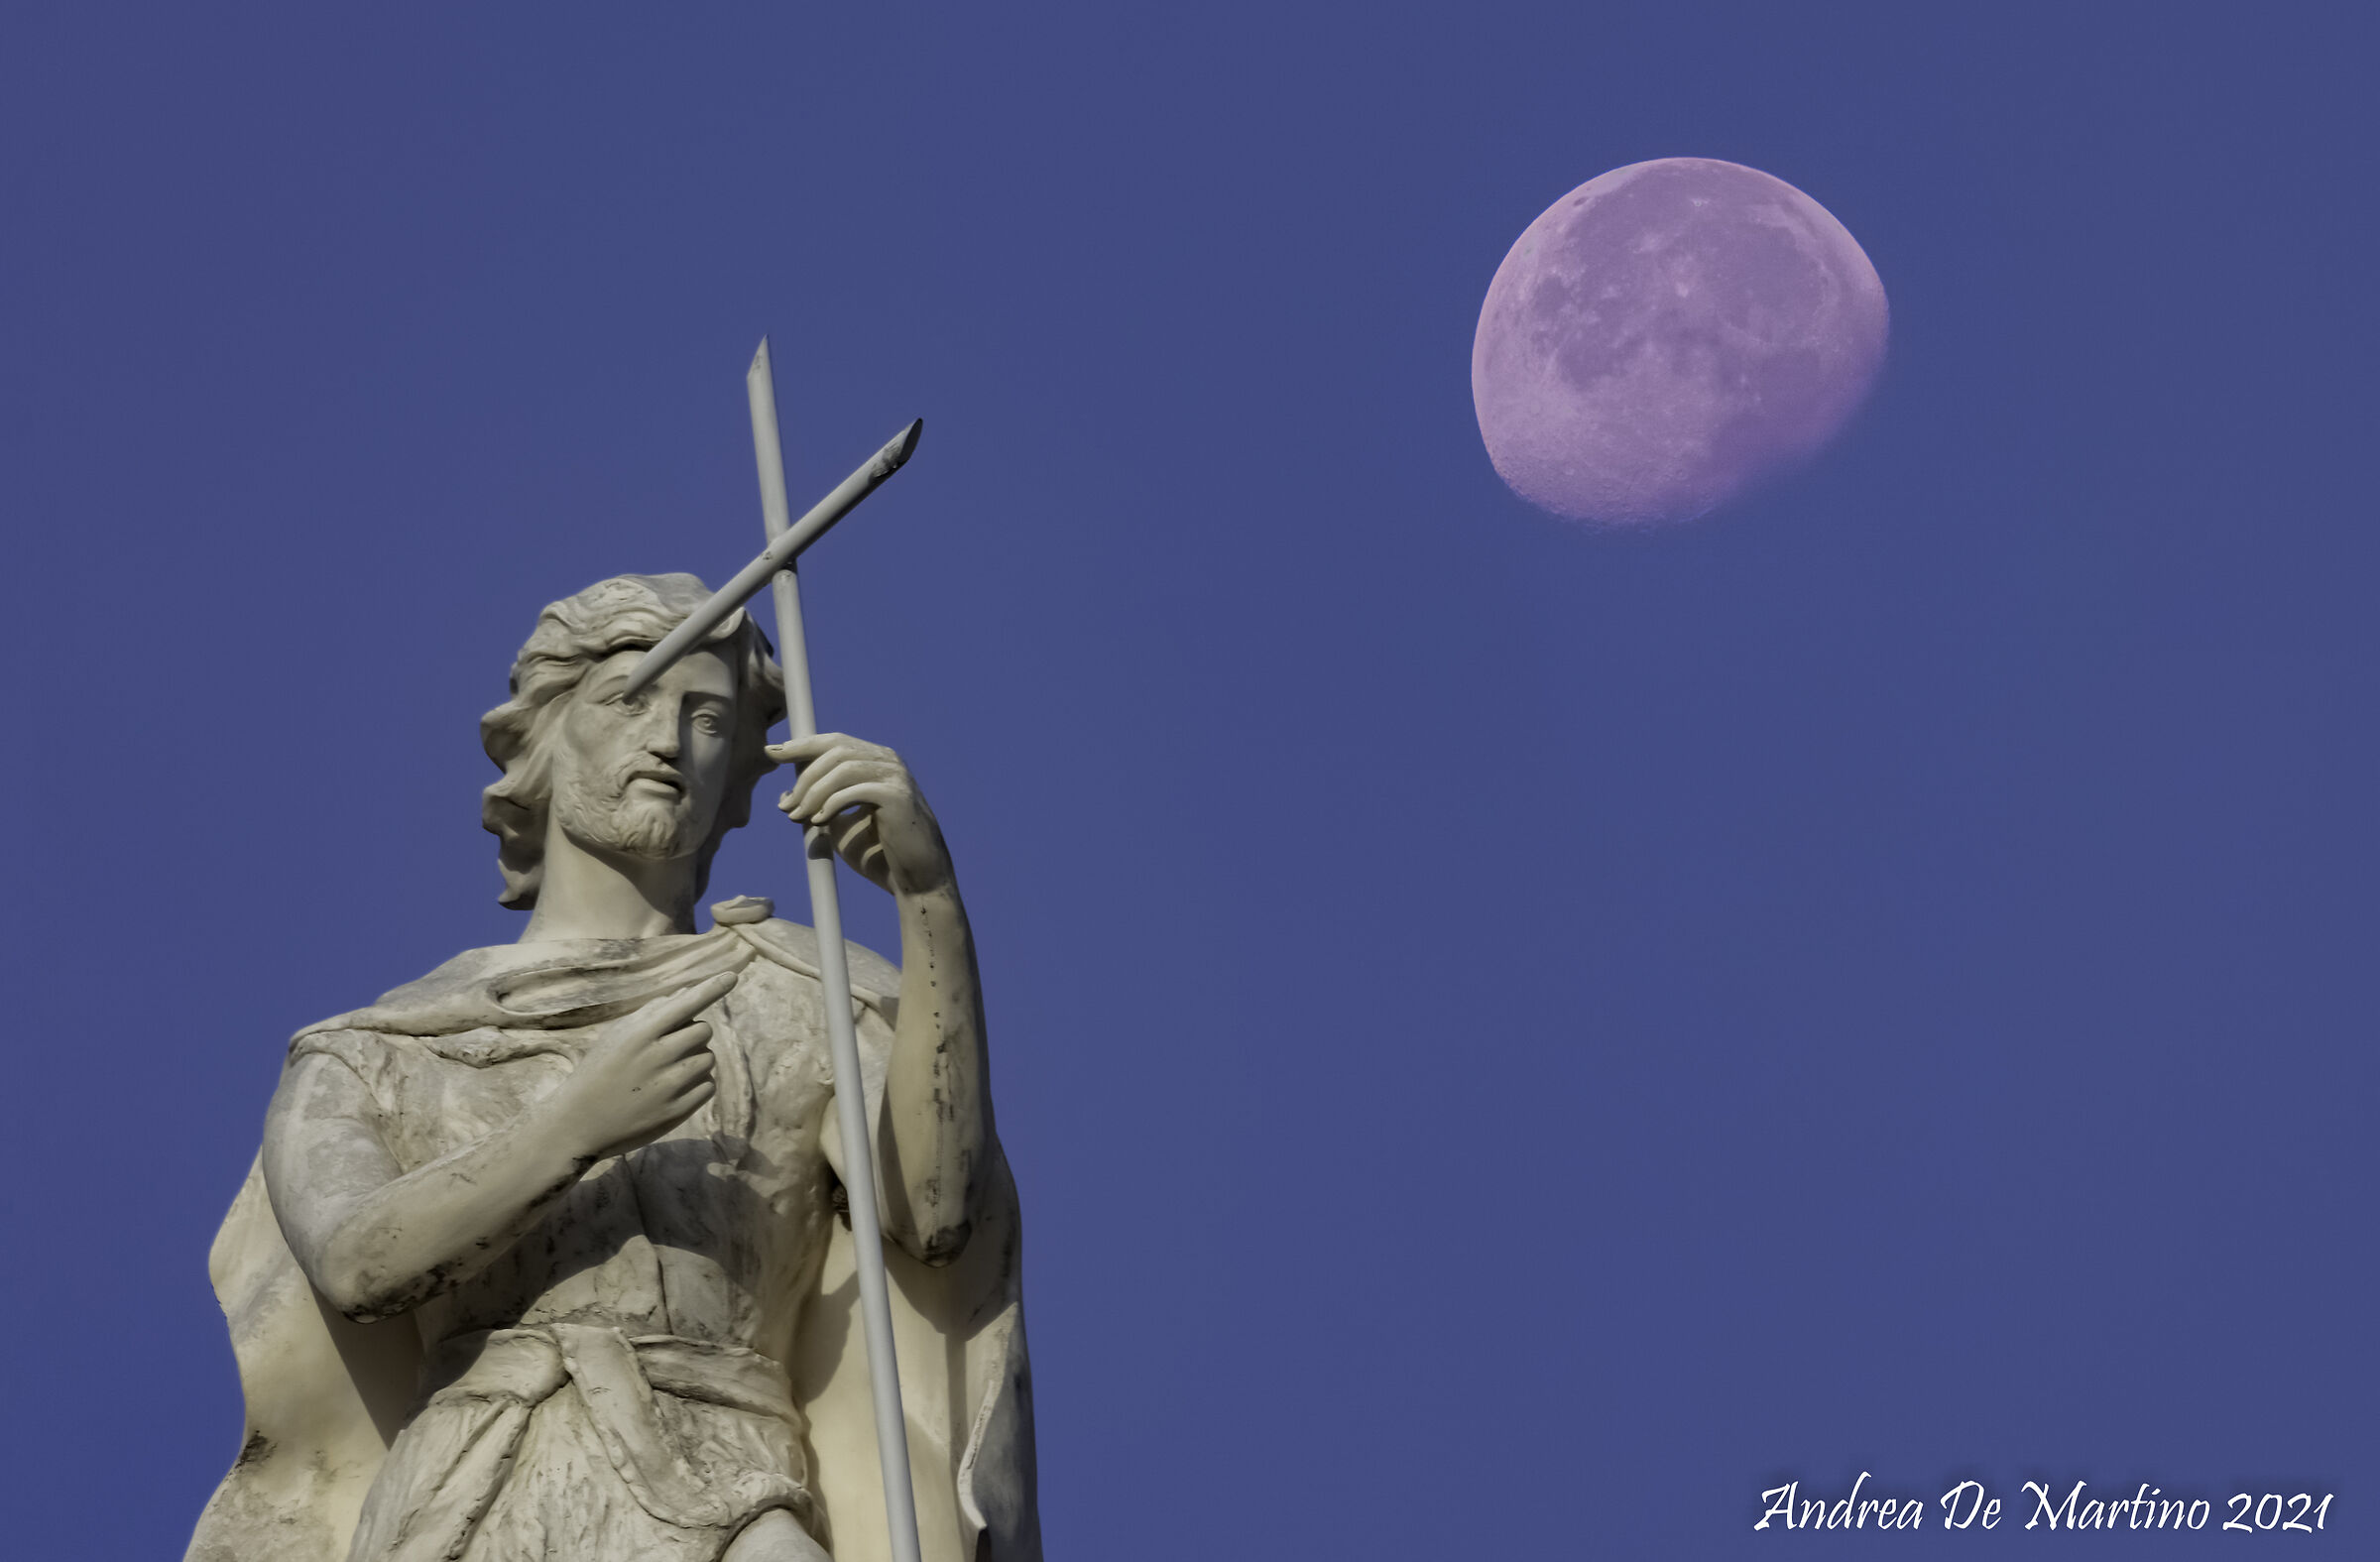 St. John and the Moon...